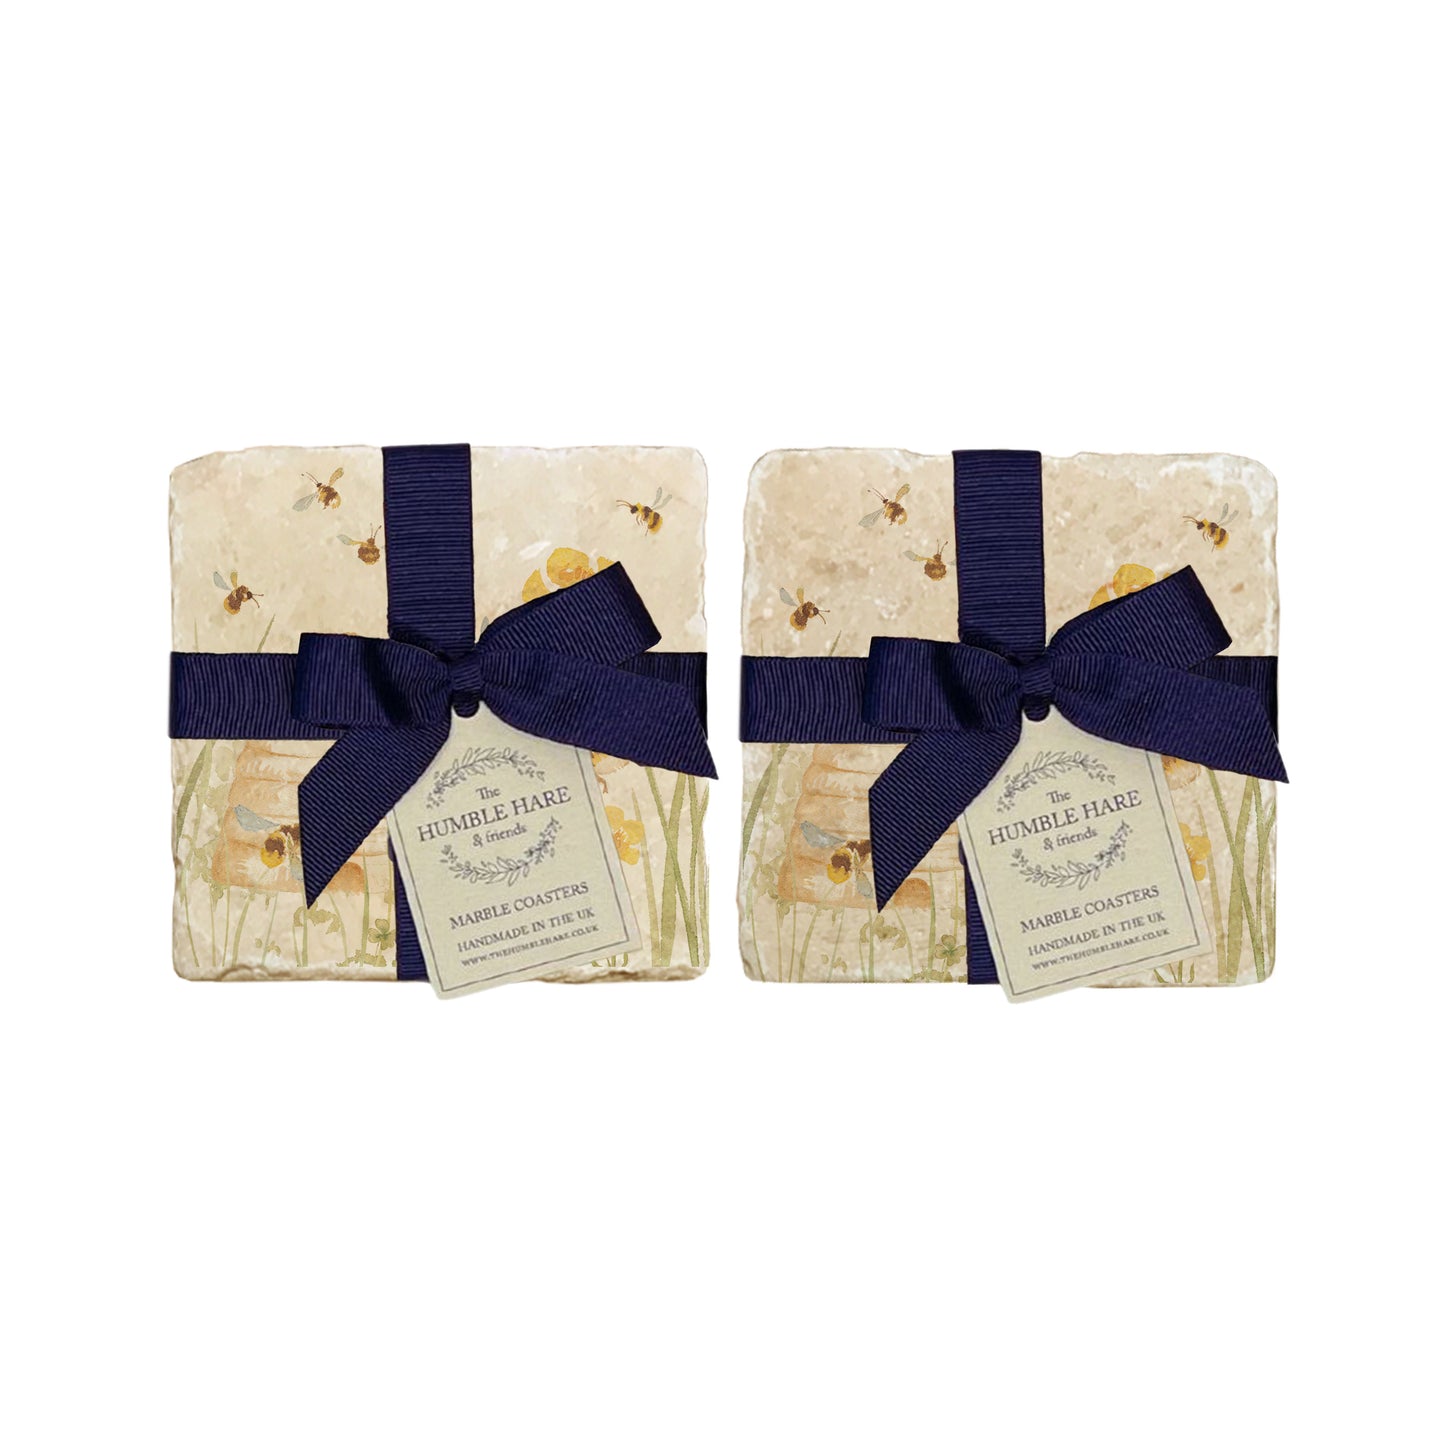 A set of 4 handmade marble coasters with a bee design, packaged in 2 pairs, with a luxurious dark blue bow and gift tag.